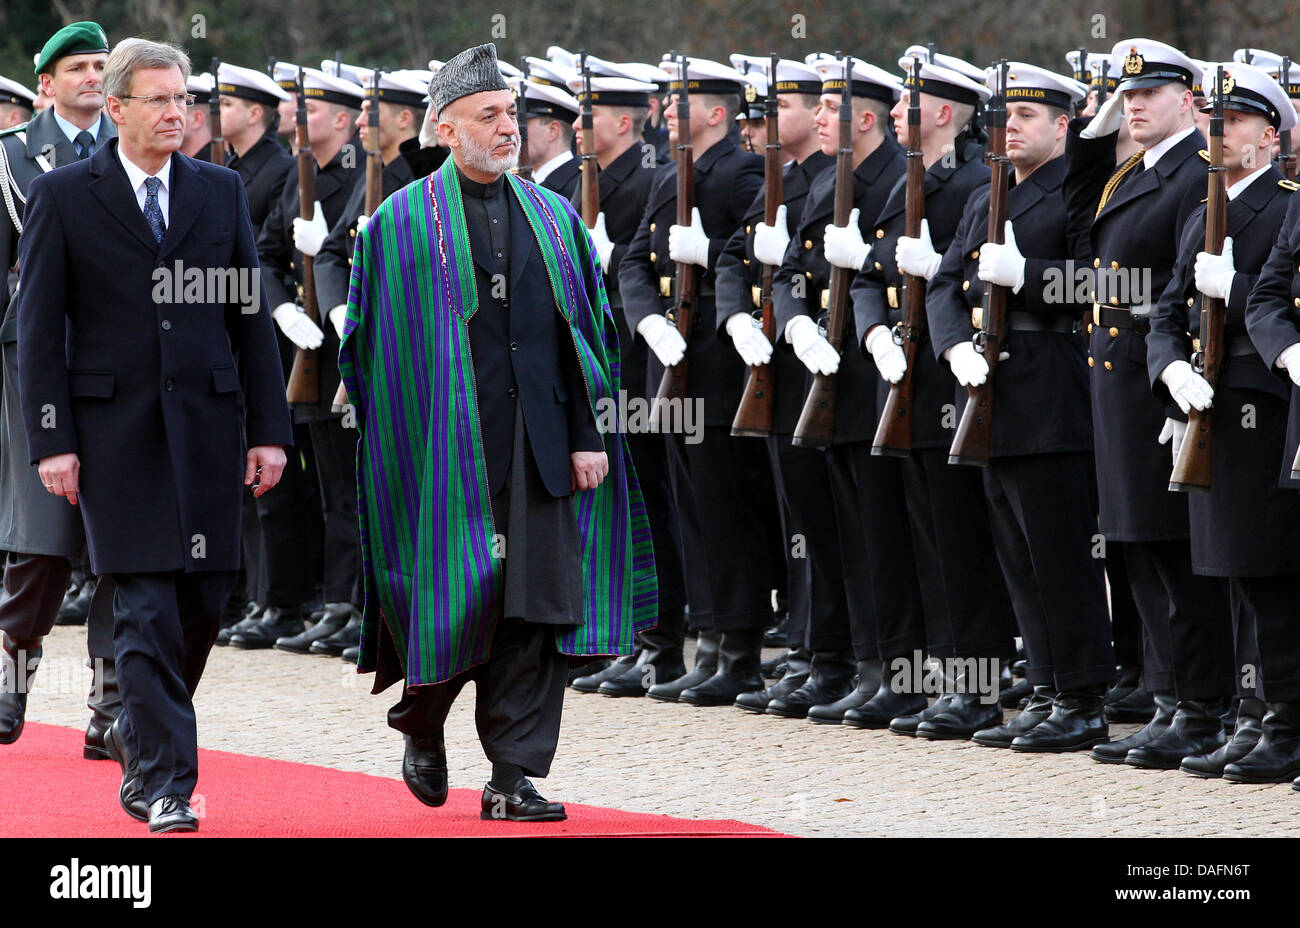 Afghanistan President Hamid Karsai is welcomed by German President Christian Wulff (L) with military honours at Bellevue Palace in Berlin, Germany, 06 December 2011. Karsai is on a one-day visit to the German capital. Photo: WOLFGANG KUMM Stock Photo